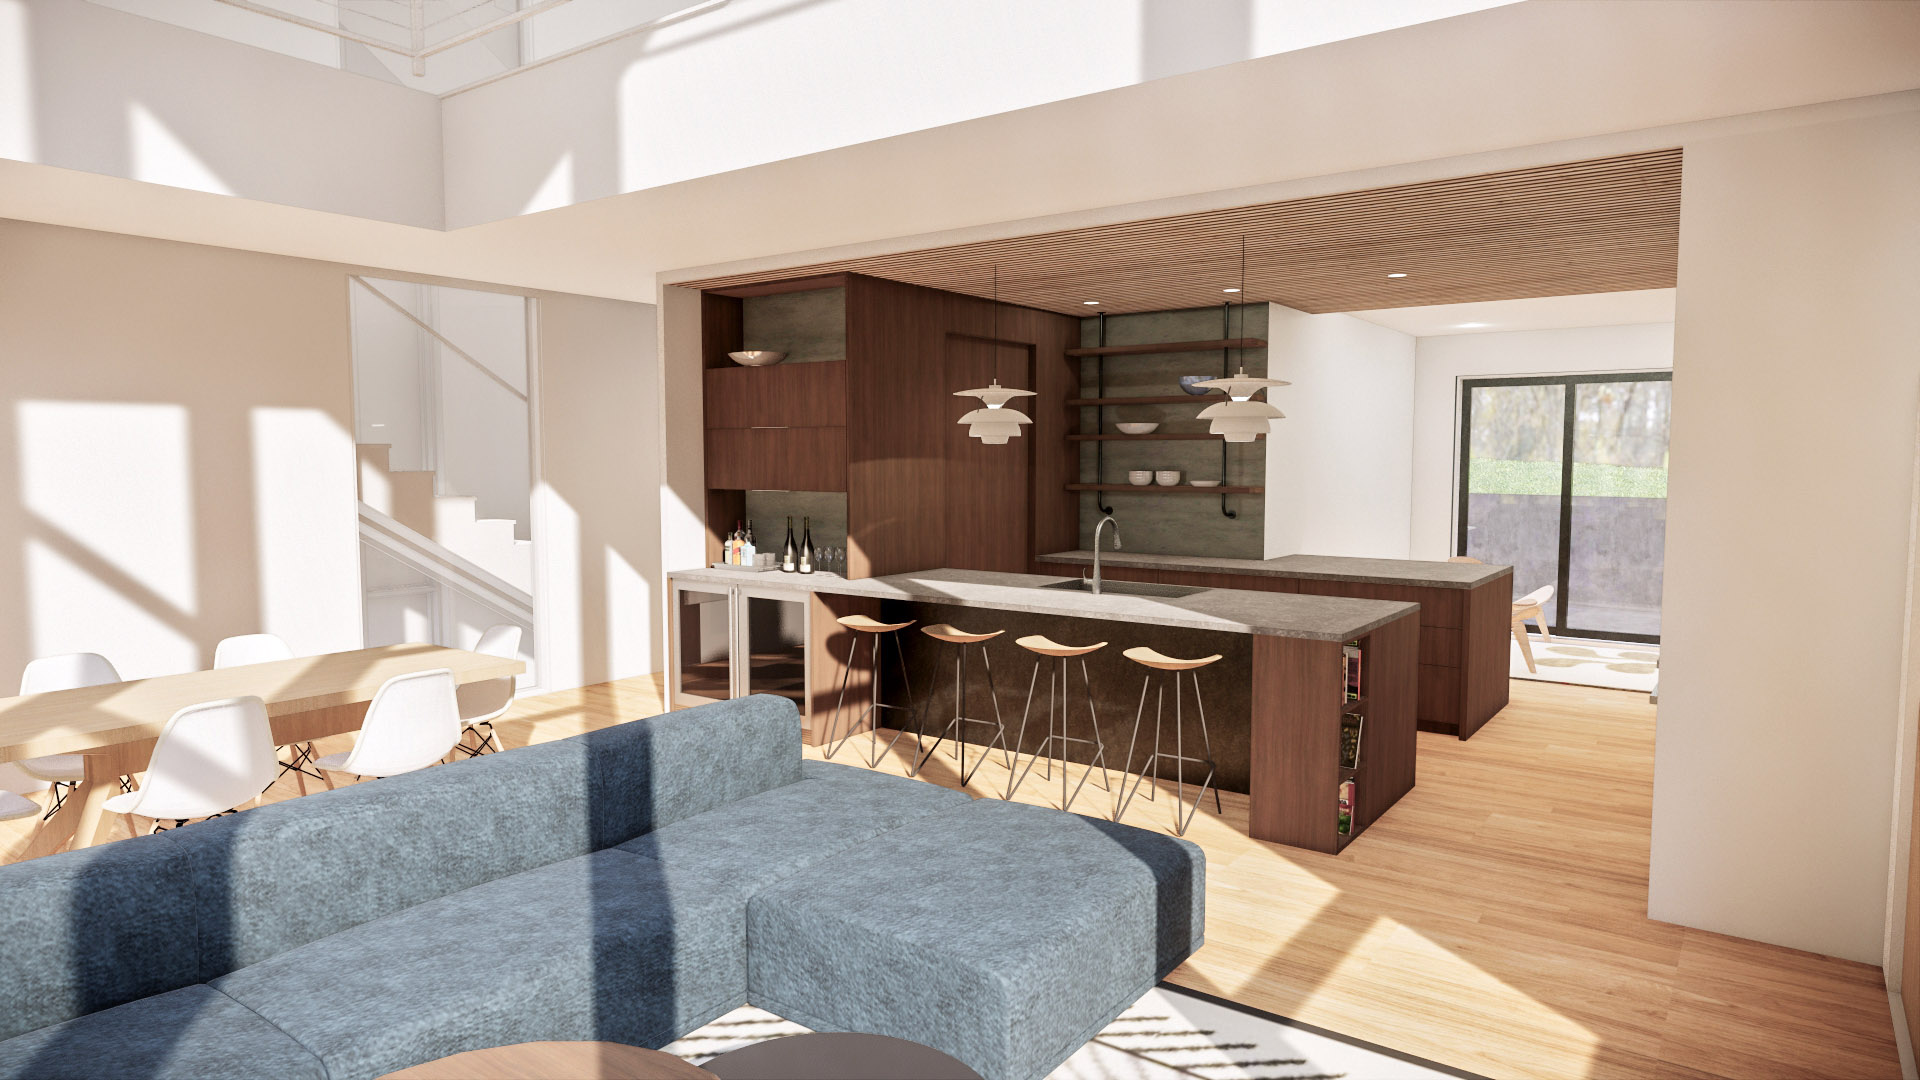 3D architectural rendering for modern kitchen ideas-living room-NC architect